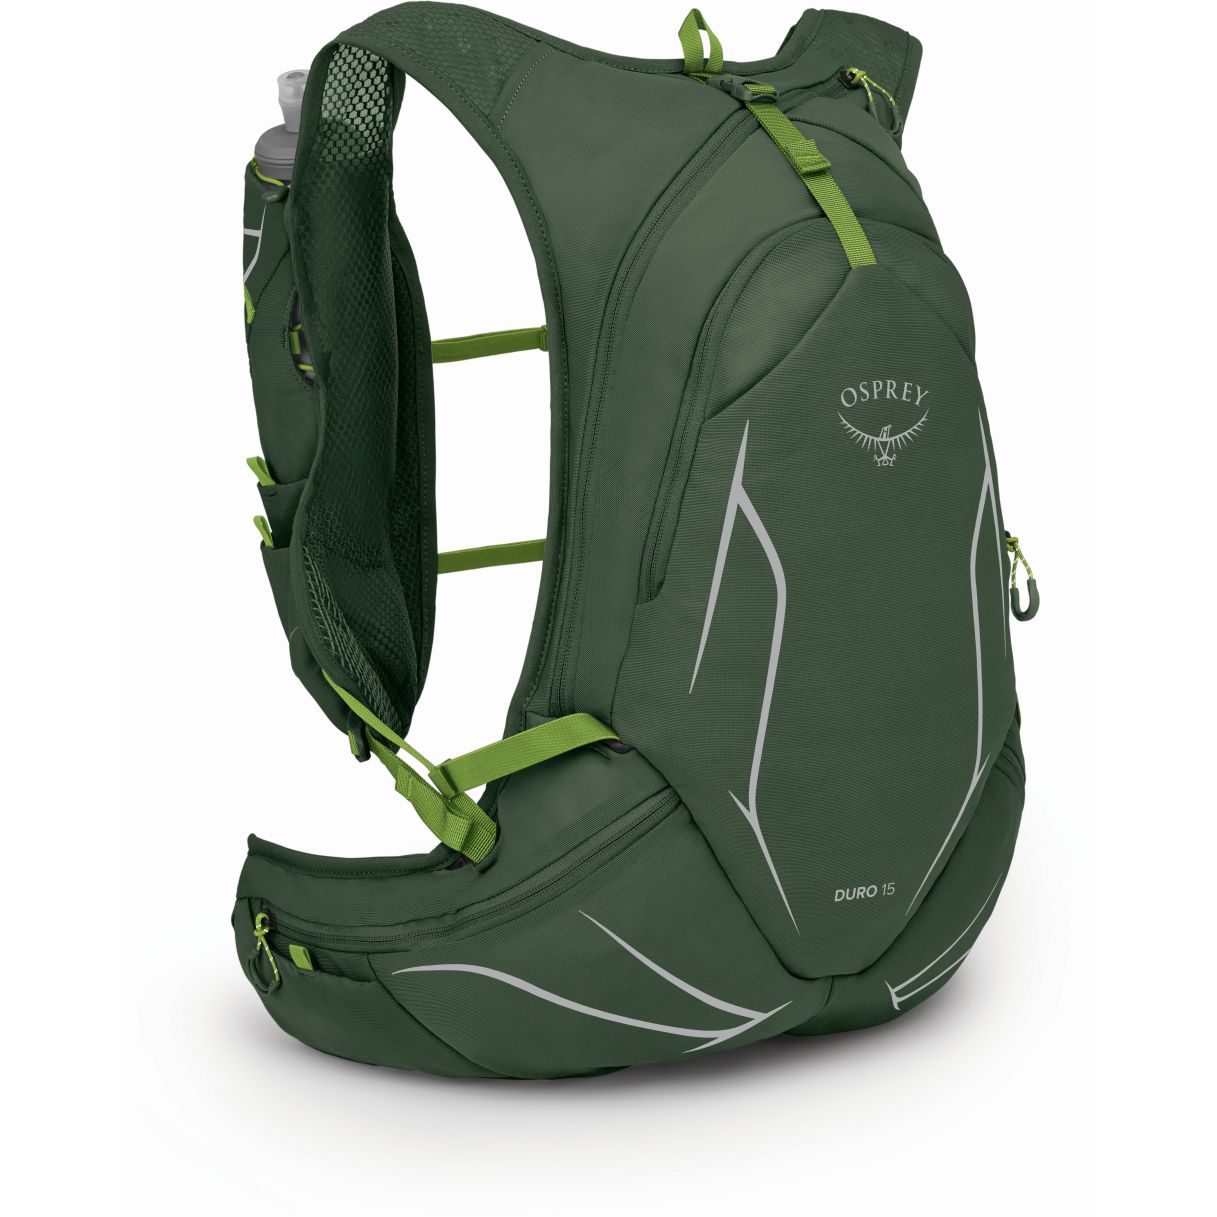 Picture of Osprey Duro 15 Running Backpack - Seaweed Green/Limon - L/XL